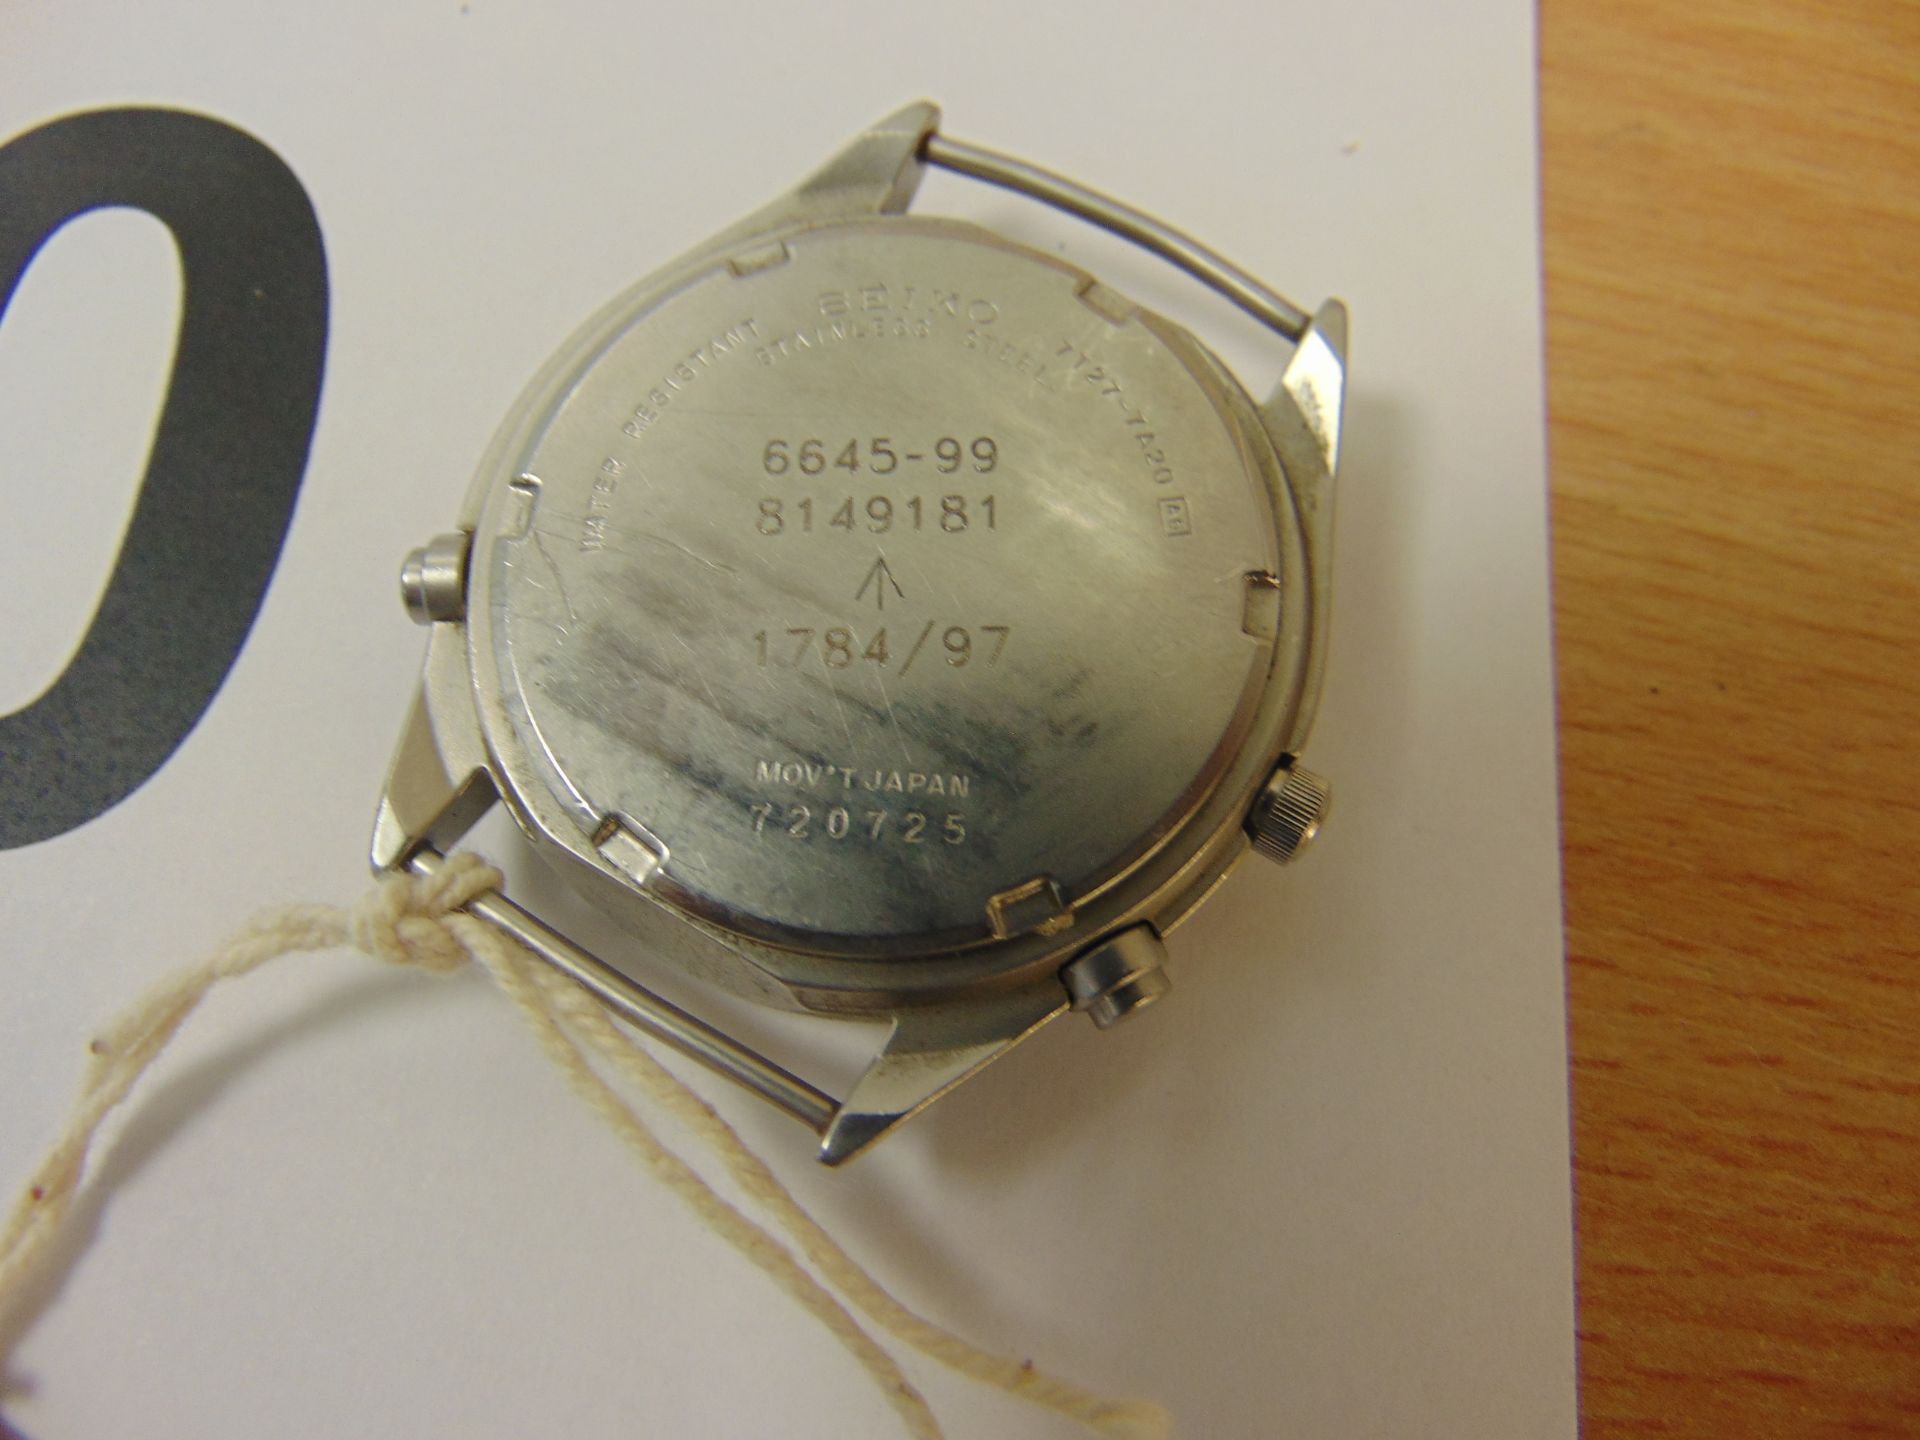 Seiko Pilots Chrono RAF issue with NATO Marks Crystal Cracked as shown, Dated 1997 - Image 4 of 4